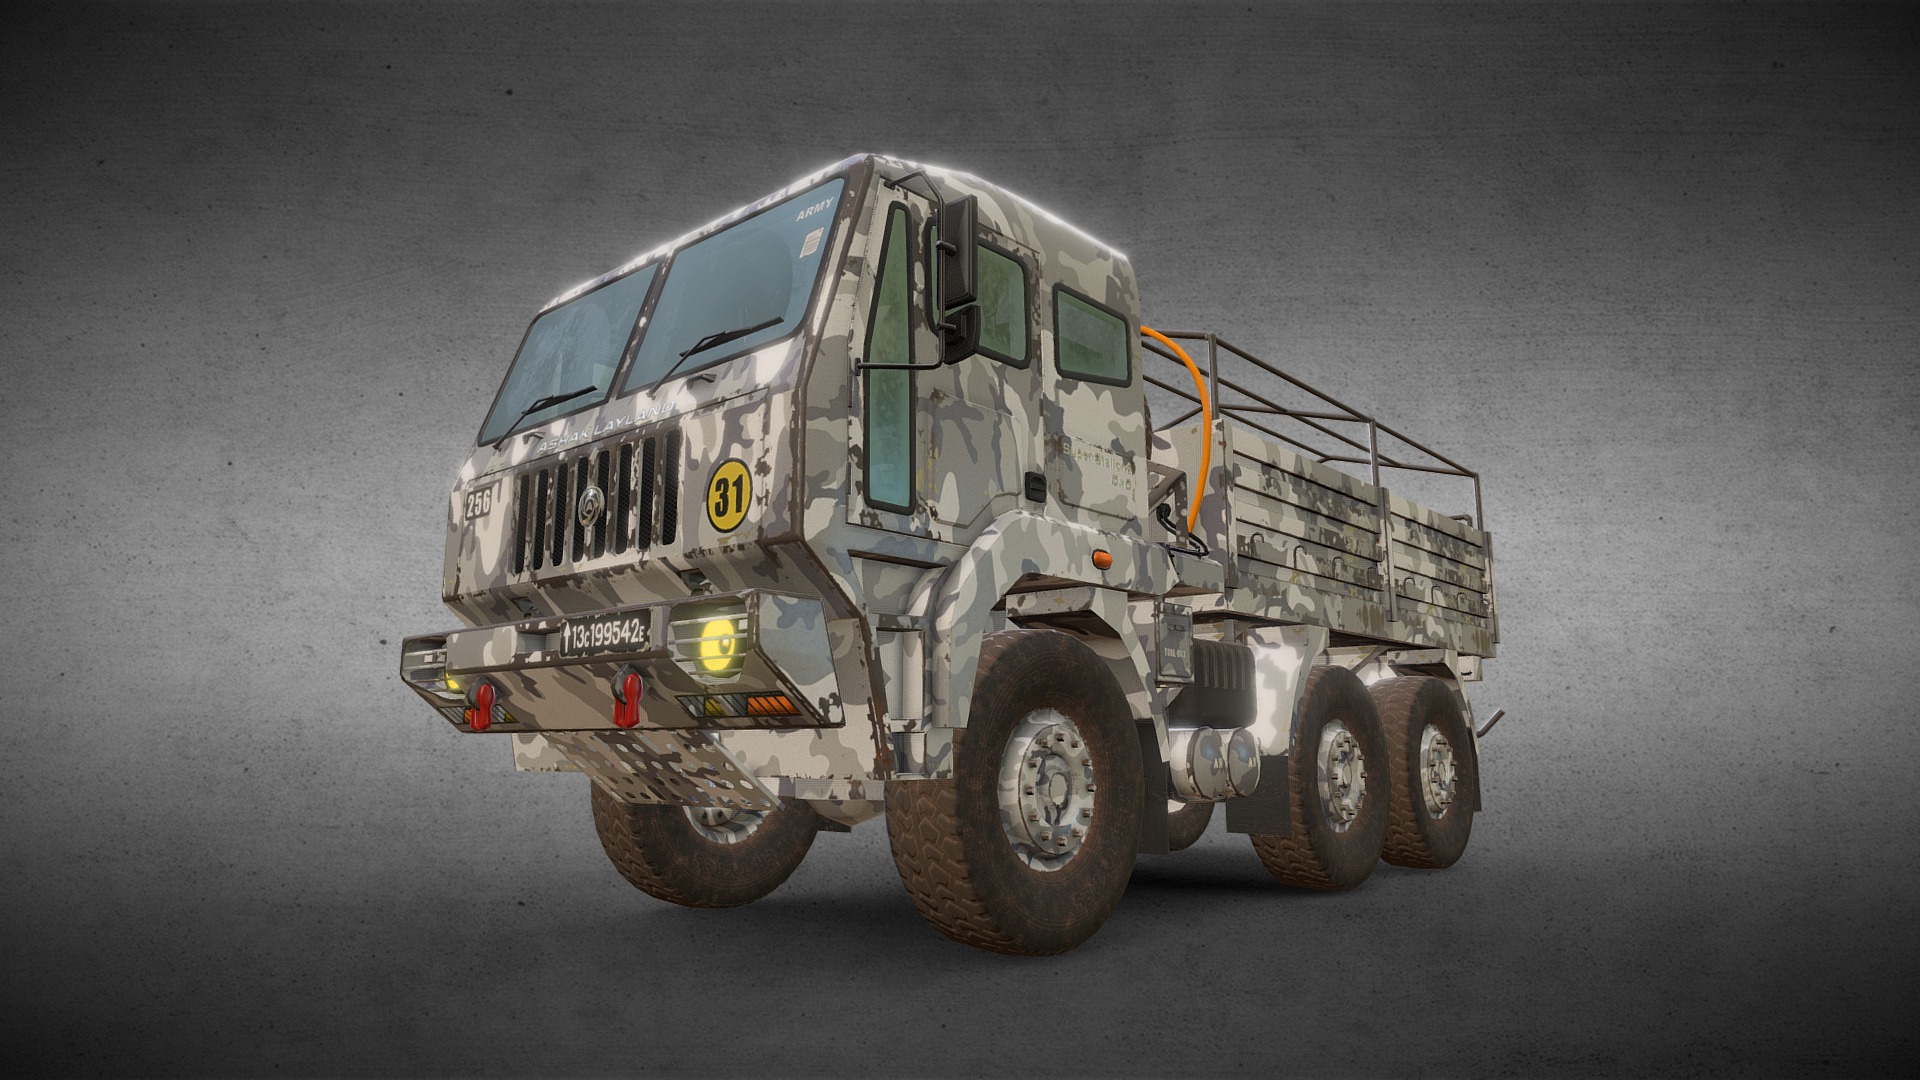 3D model 6×6 Military Truck Variation 4 - This is a 3D model of the 6x6 Military Truck Variation 4. The 3D model is about a military vehicle on a grey surface.